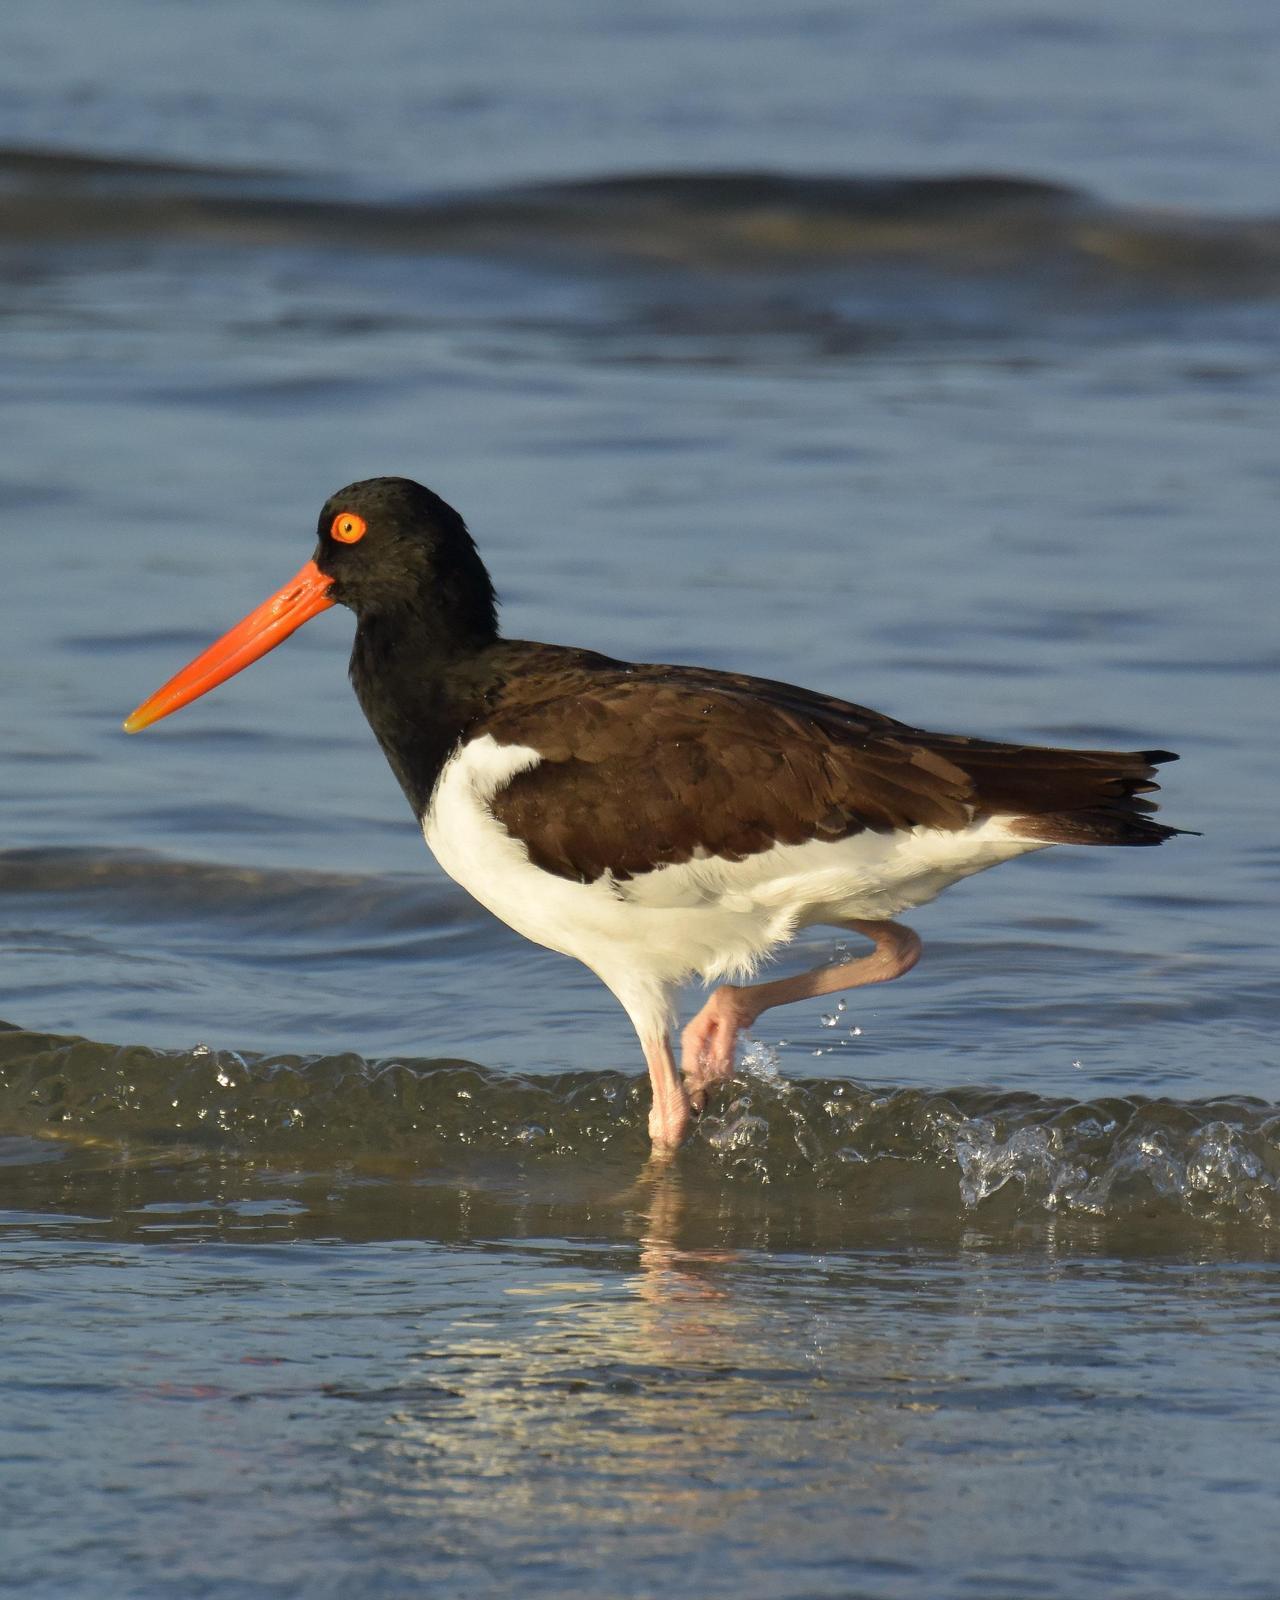 American Oystercatcher Photo by Emily Percival